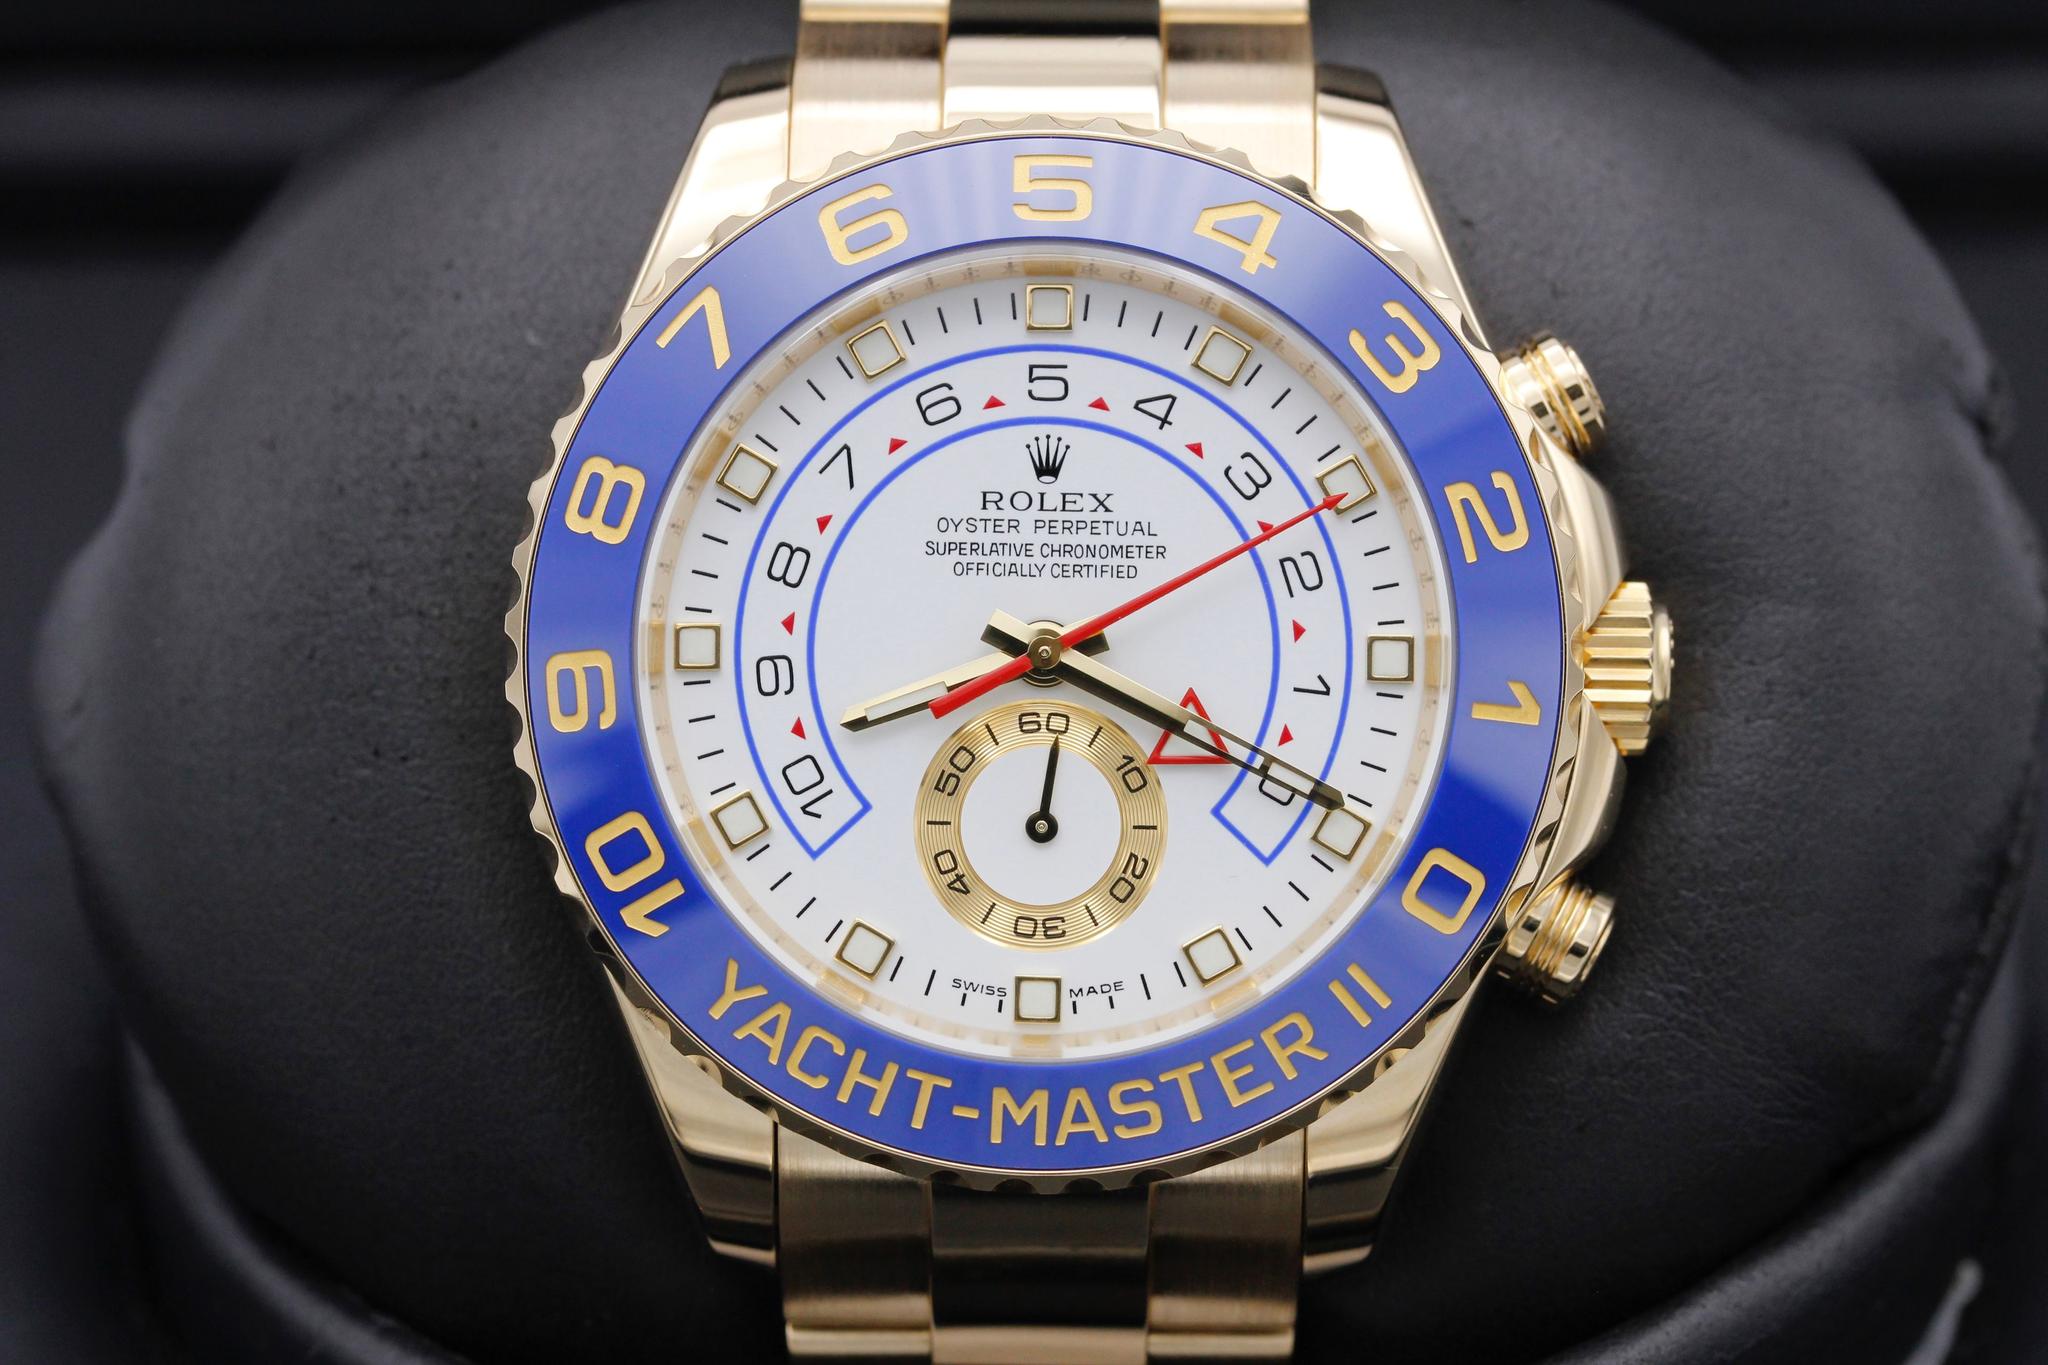 Pre-Owned Rolex Yacht-Master II 116688 Watch